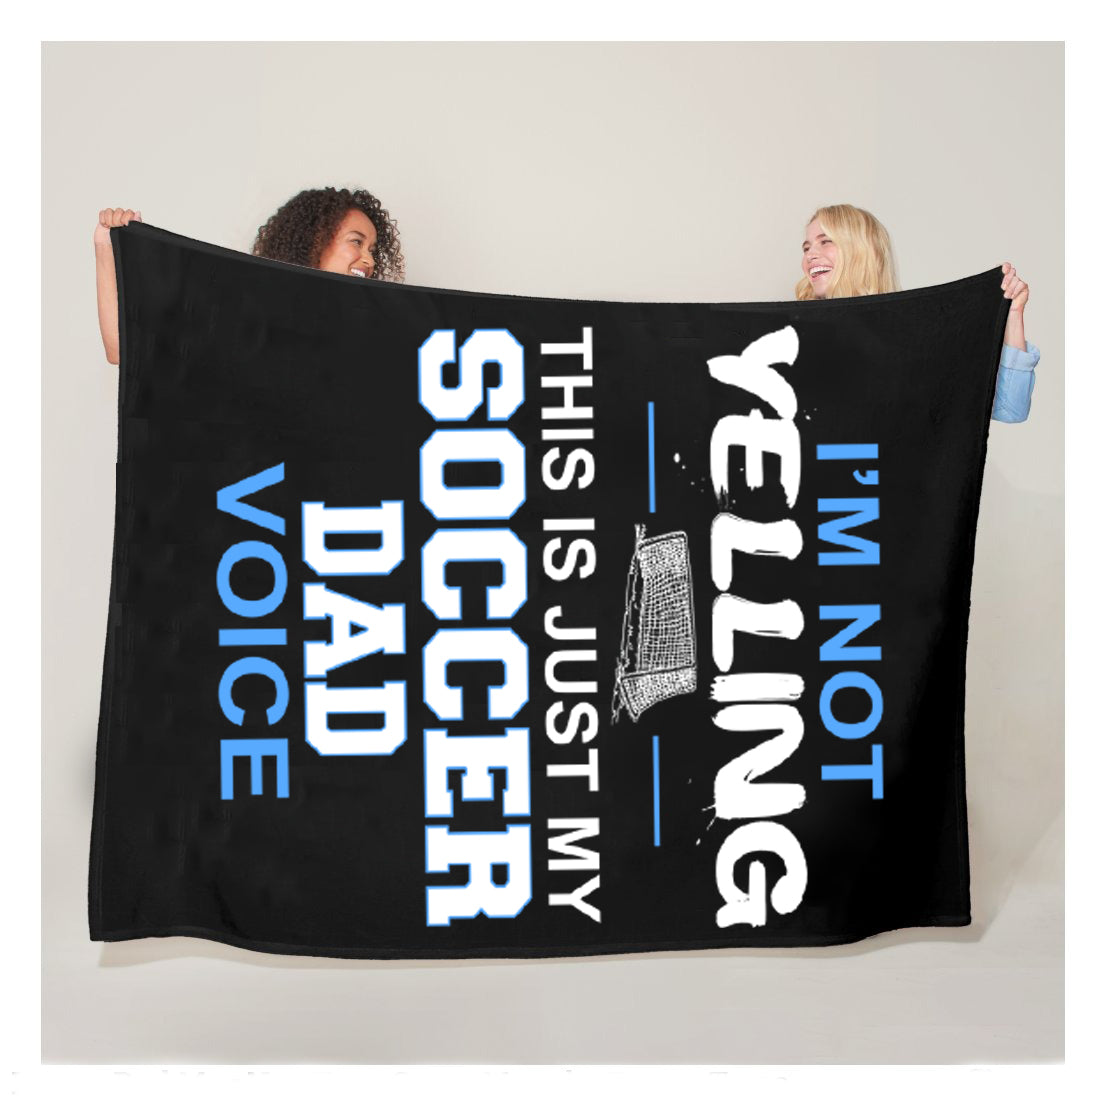 Im Not Yelling This Is Just My Soccer Dad Voice Pullover Sherpa Blanket,  Soccer Blankets, Soccer Gifts, Happy Fathers Day Gift Ideas For Dad